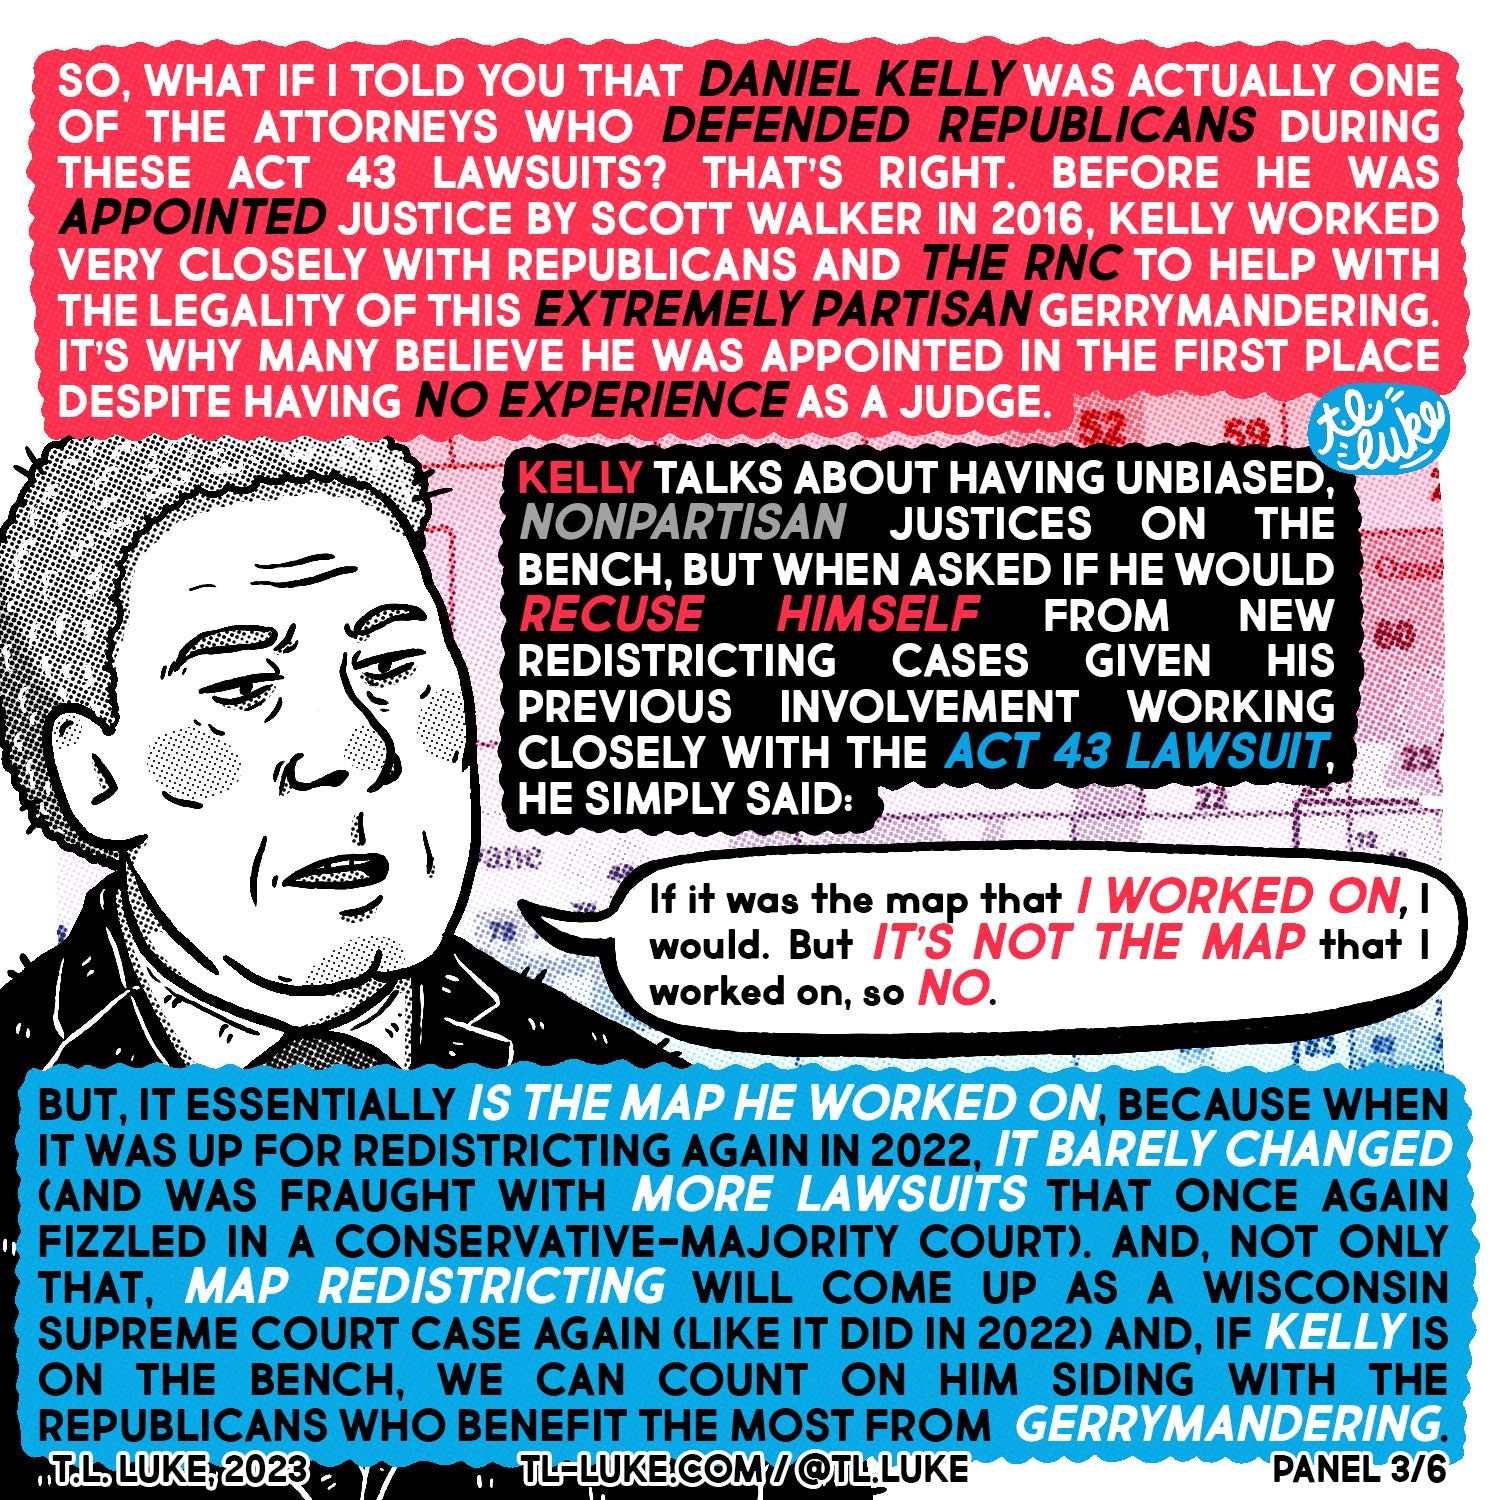 Panel 3/6 of the comic “Daniel Kelly & Map Redistricting” by T.L. Luke. This one is about how Kelly worked for Republicans in 2011.